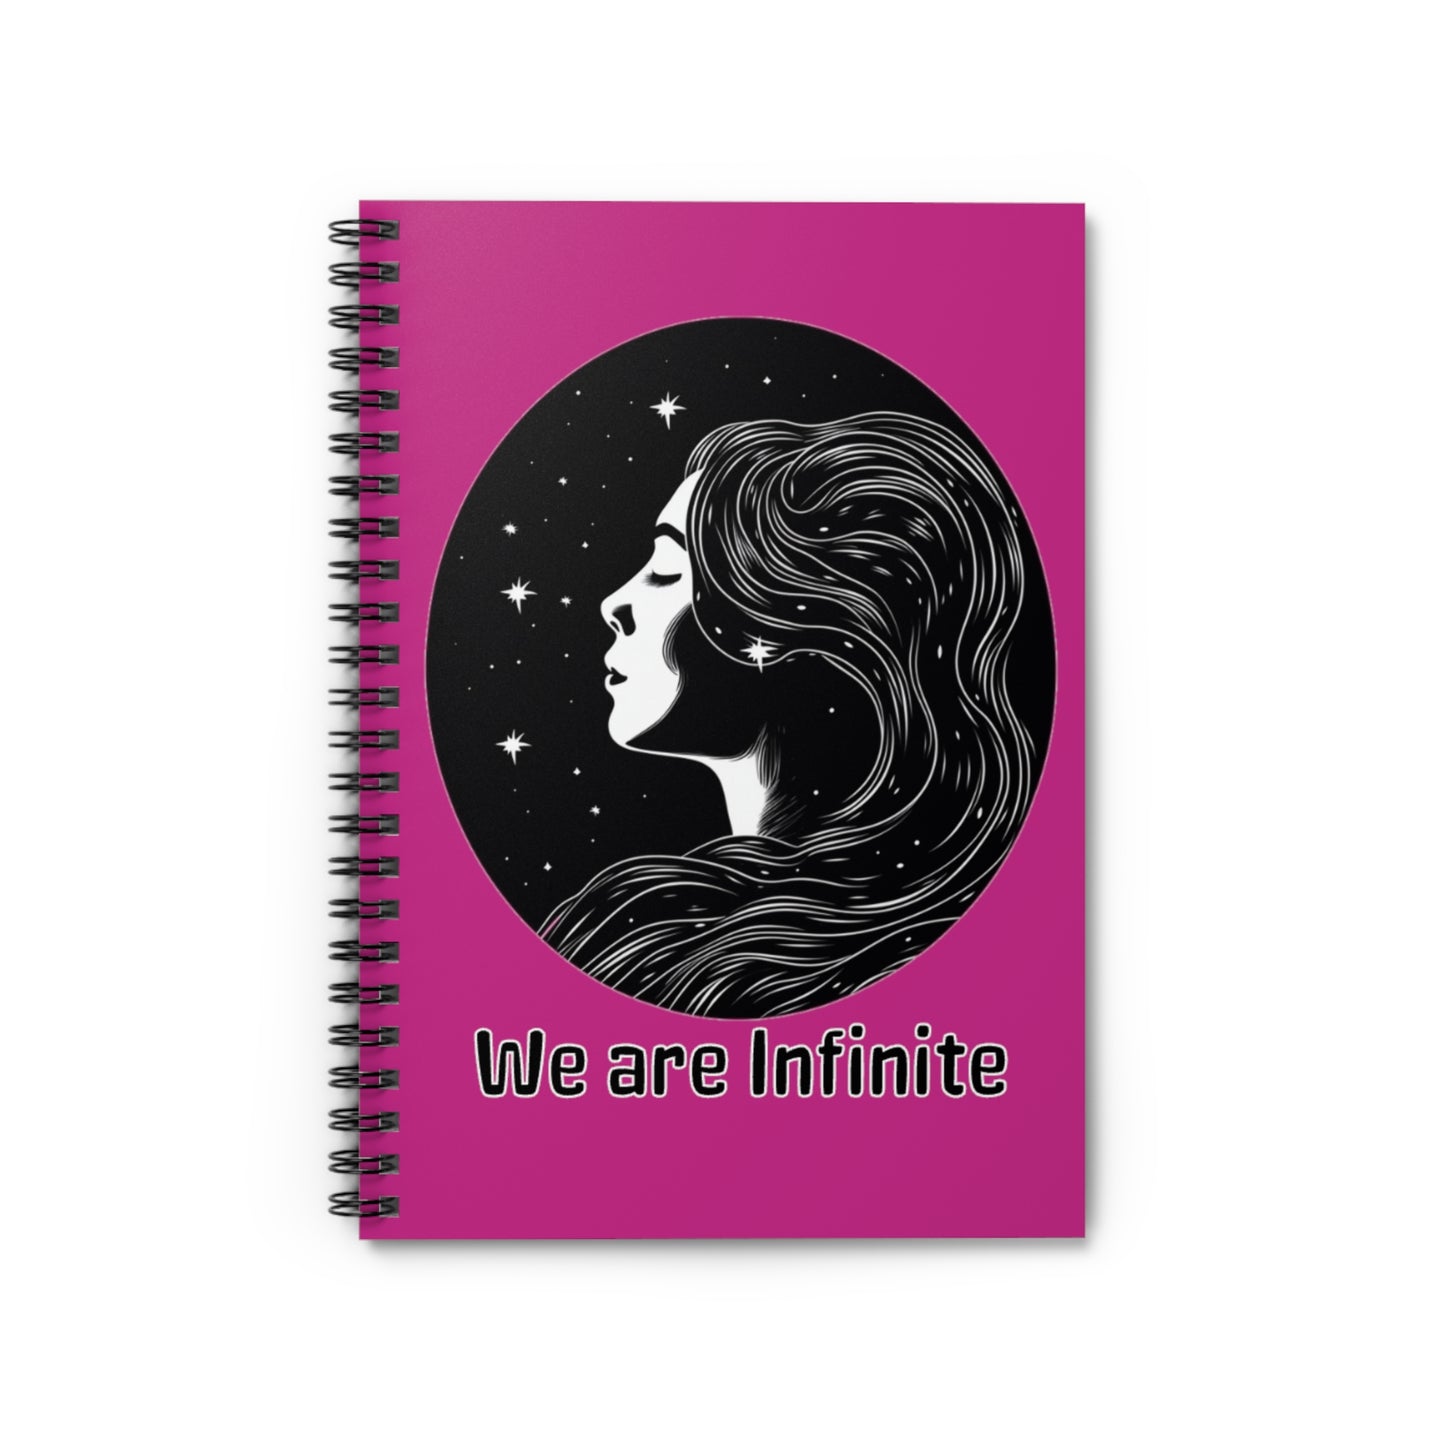 We are Infinite | Spiral Notebook - Ruled Line